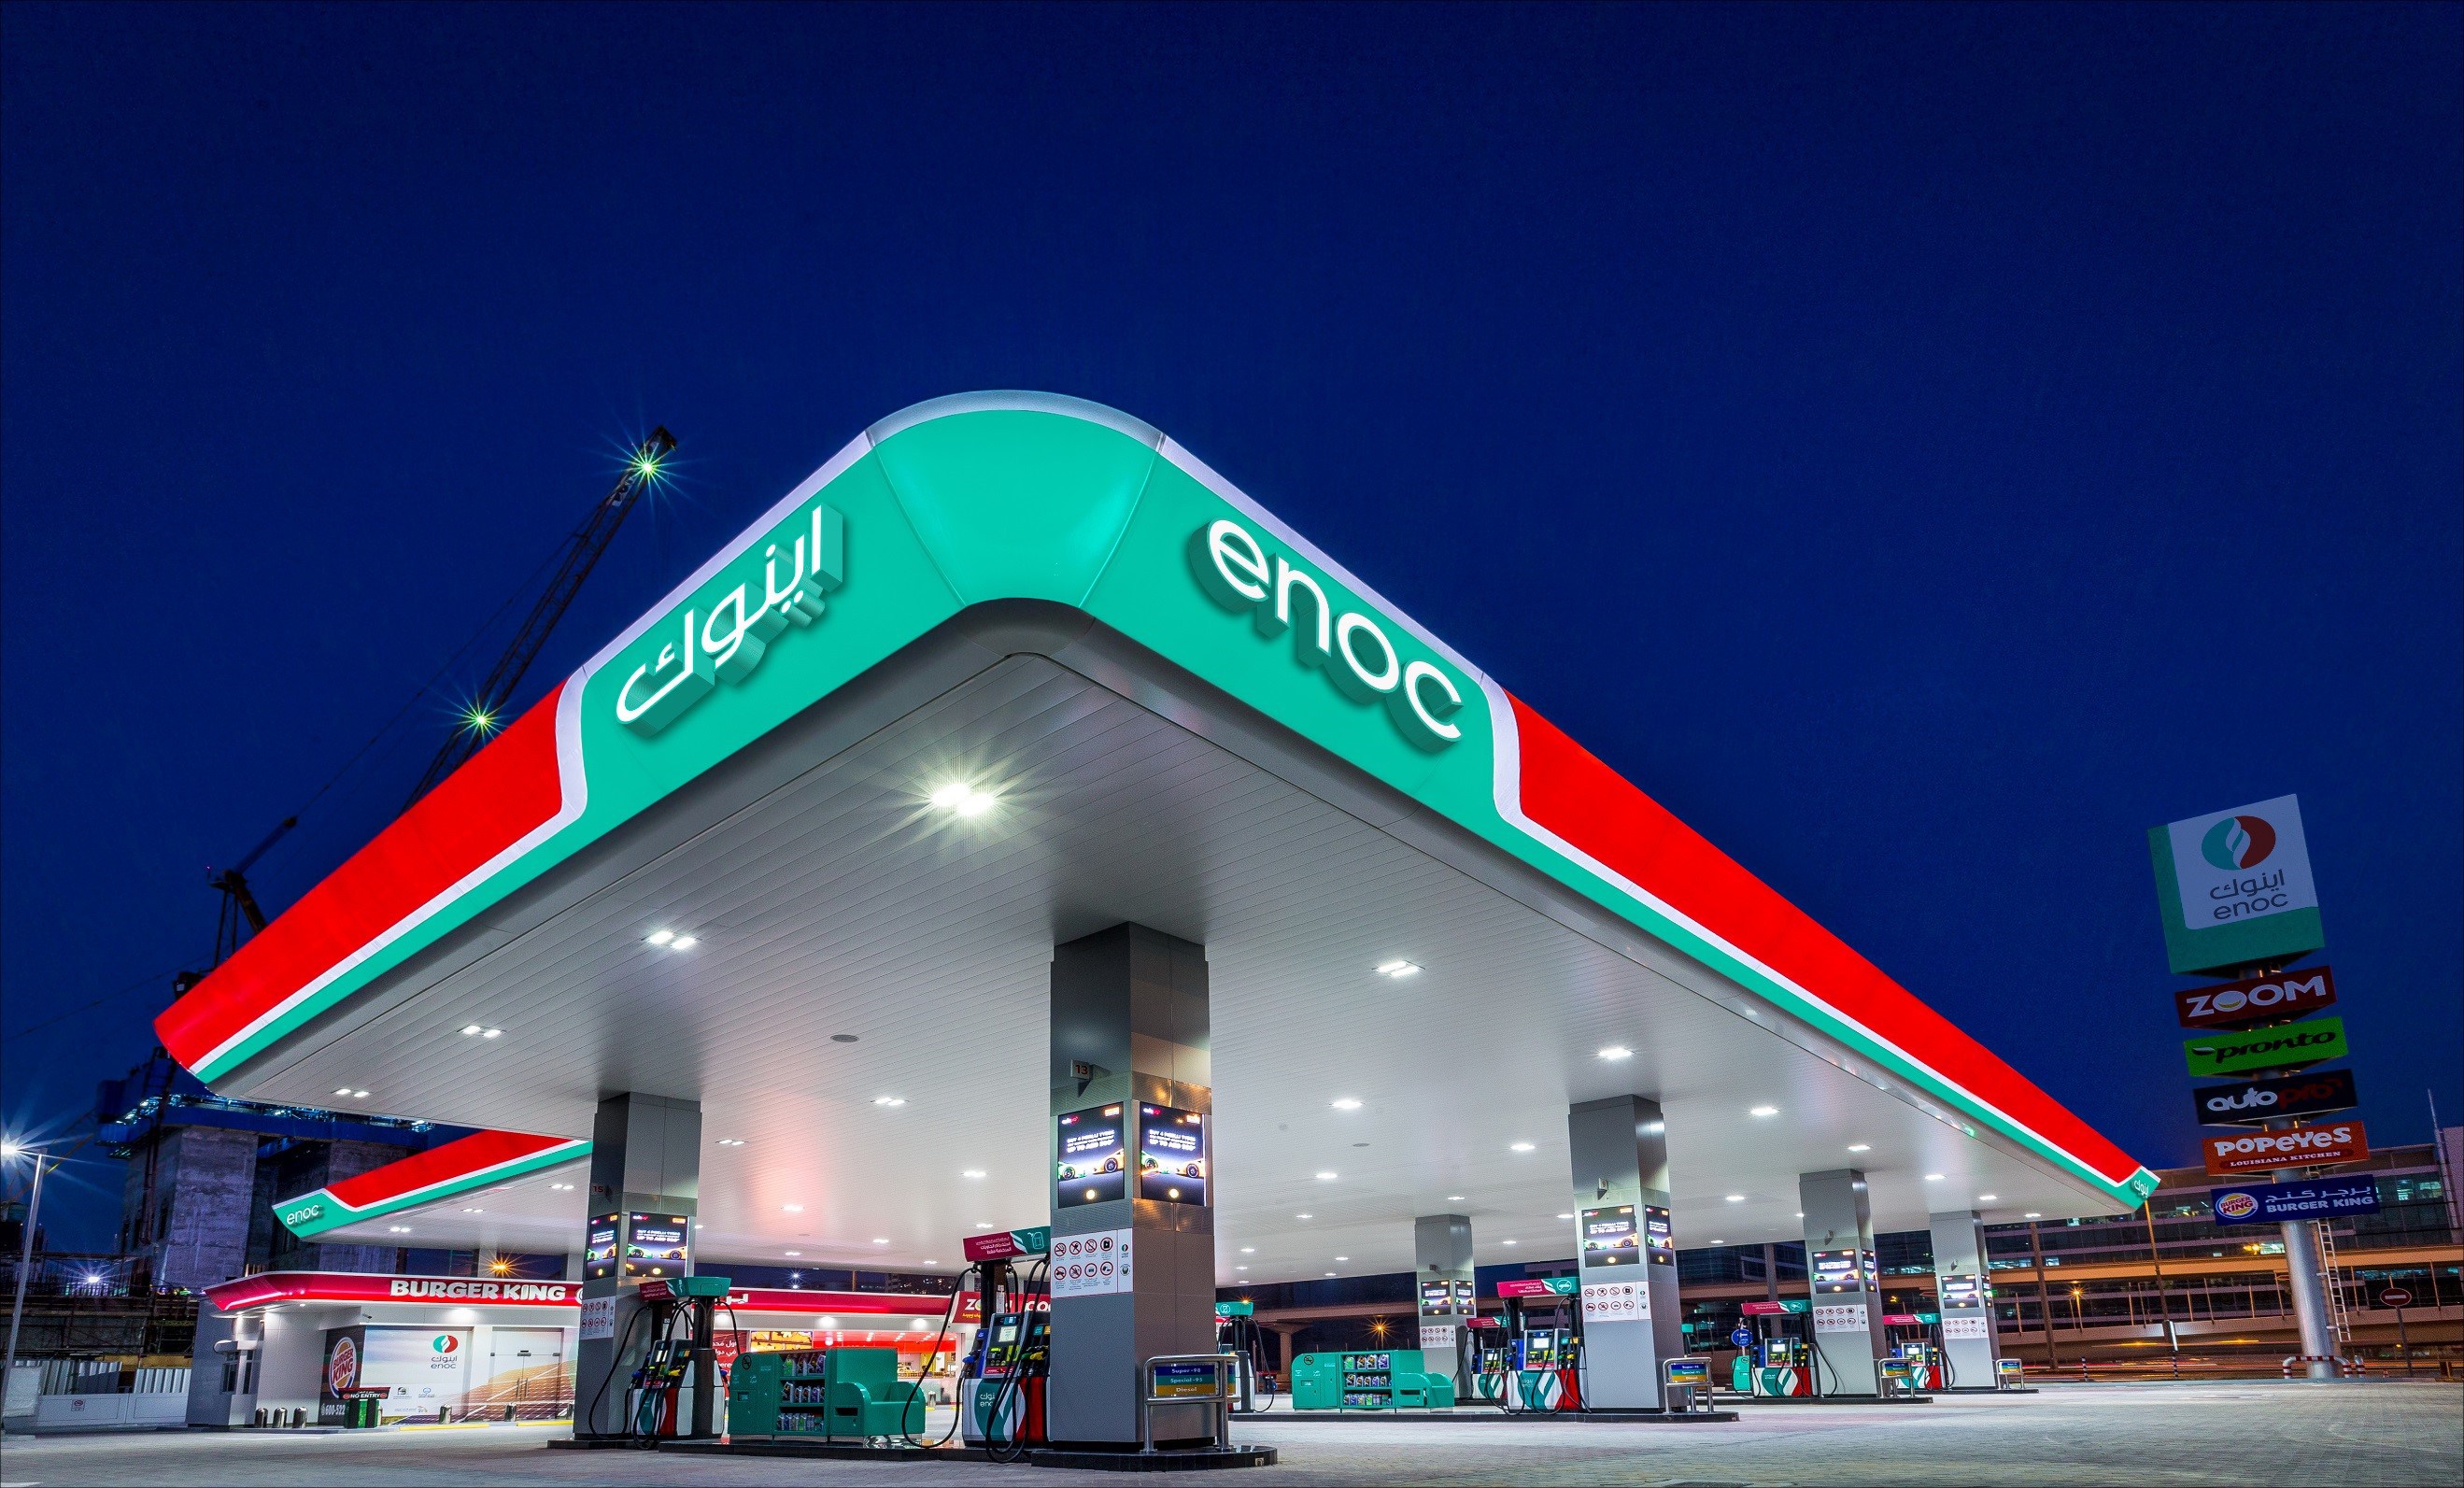 Dubai Motorists can Use Nol cards for Refuelling